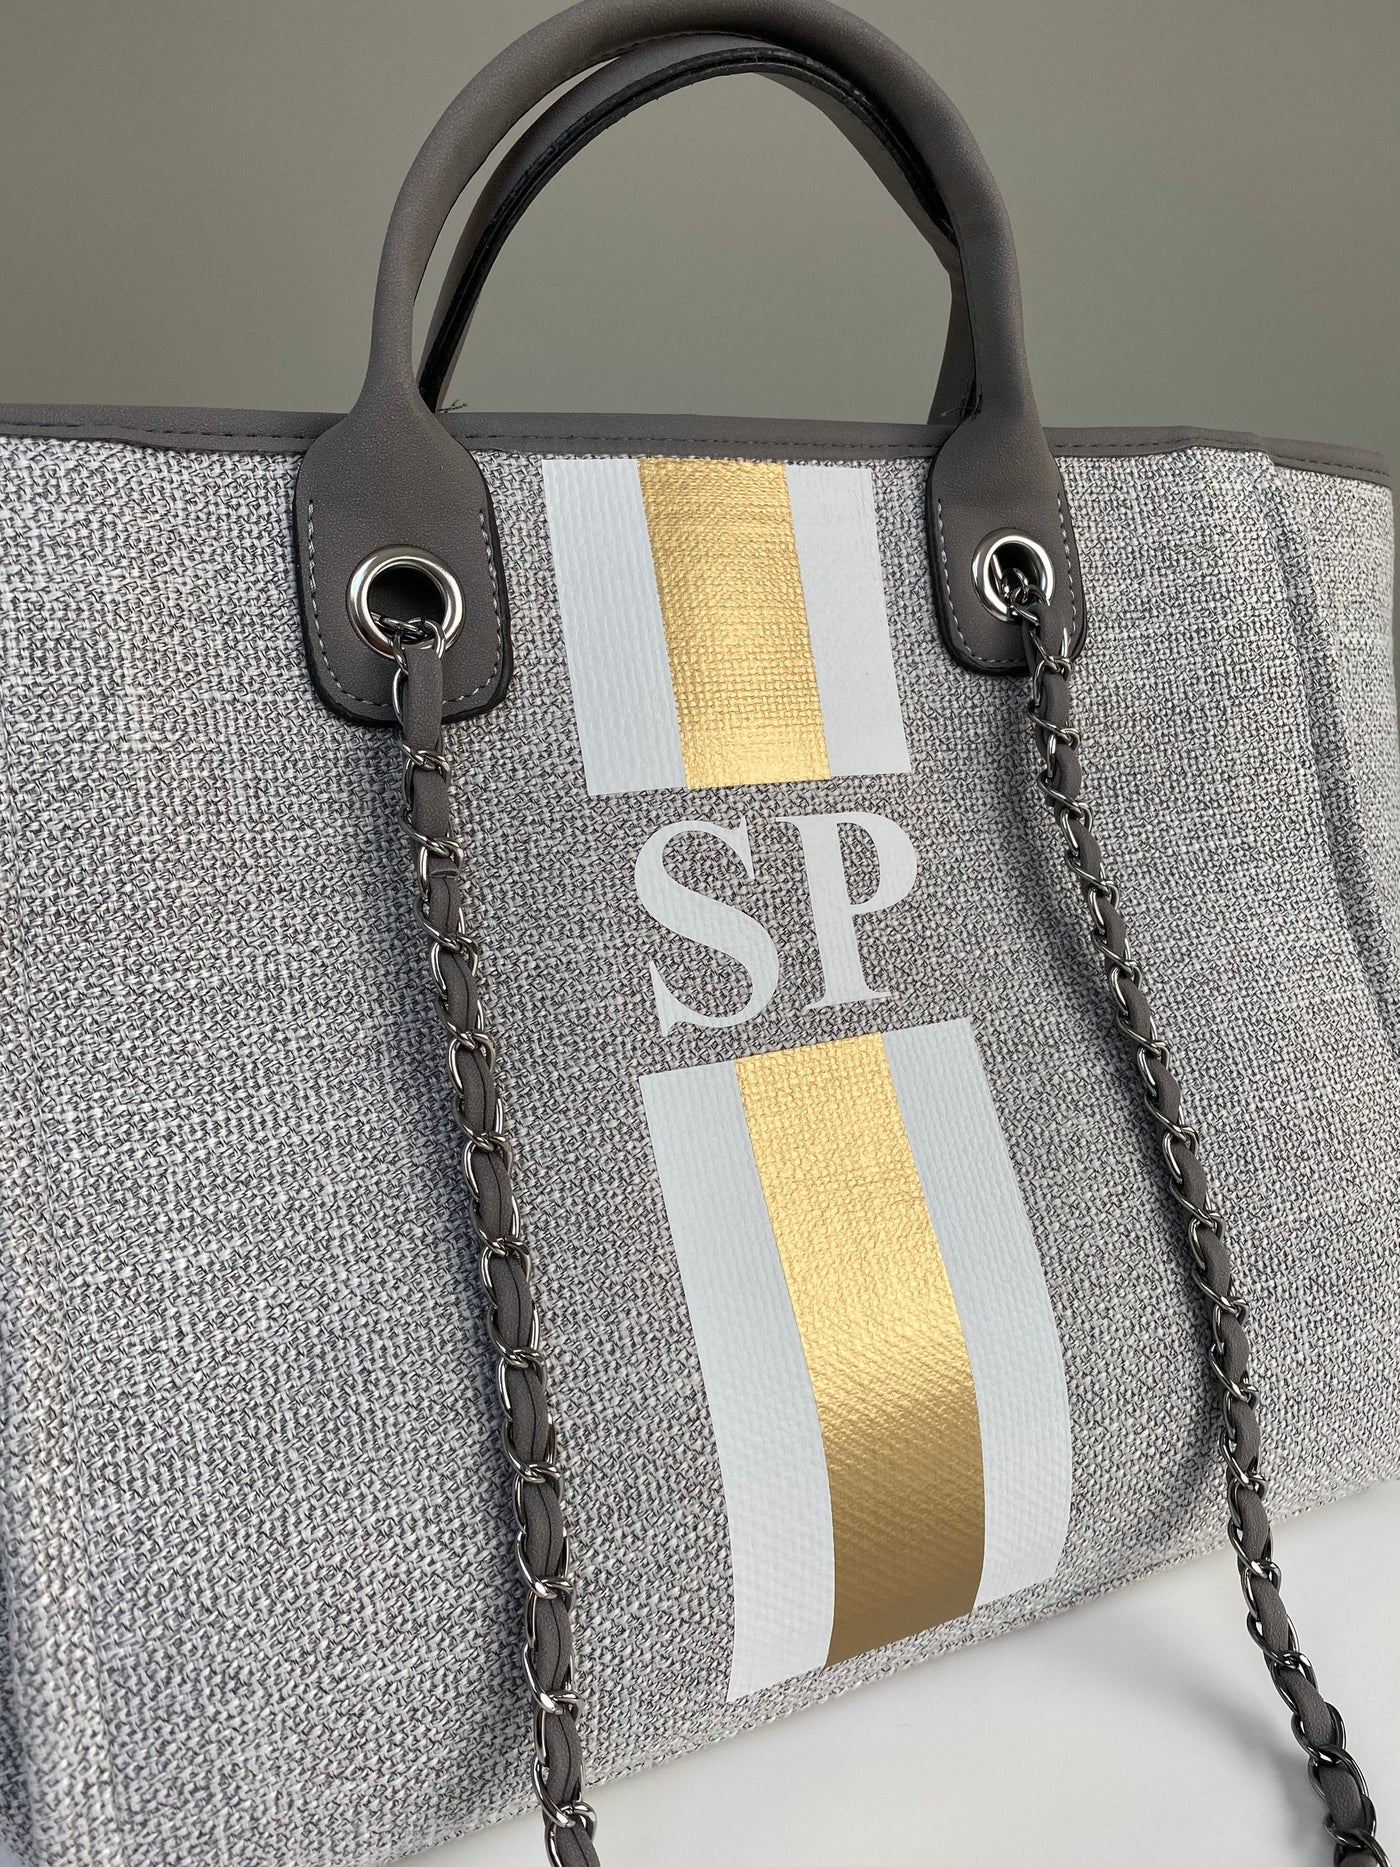 BYBLOS Grey Canvas Tote - Sample sale - Initials SP - Pink Waters 